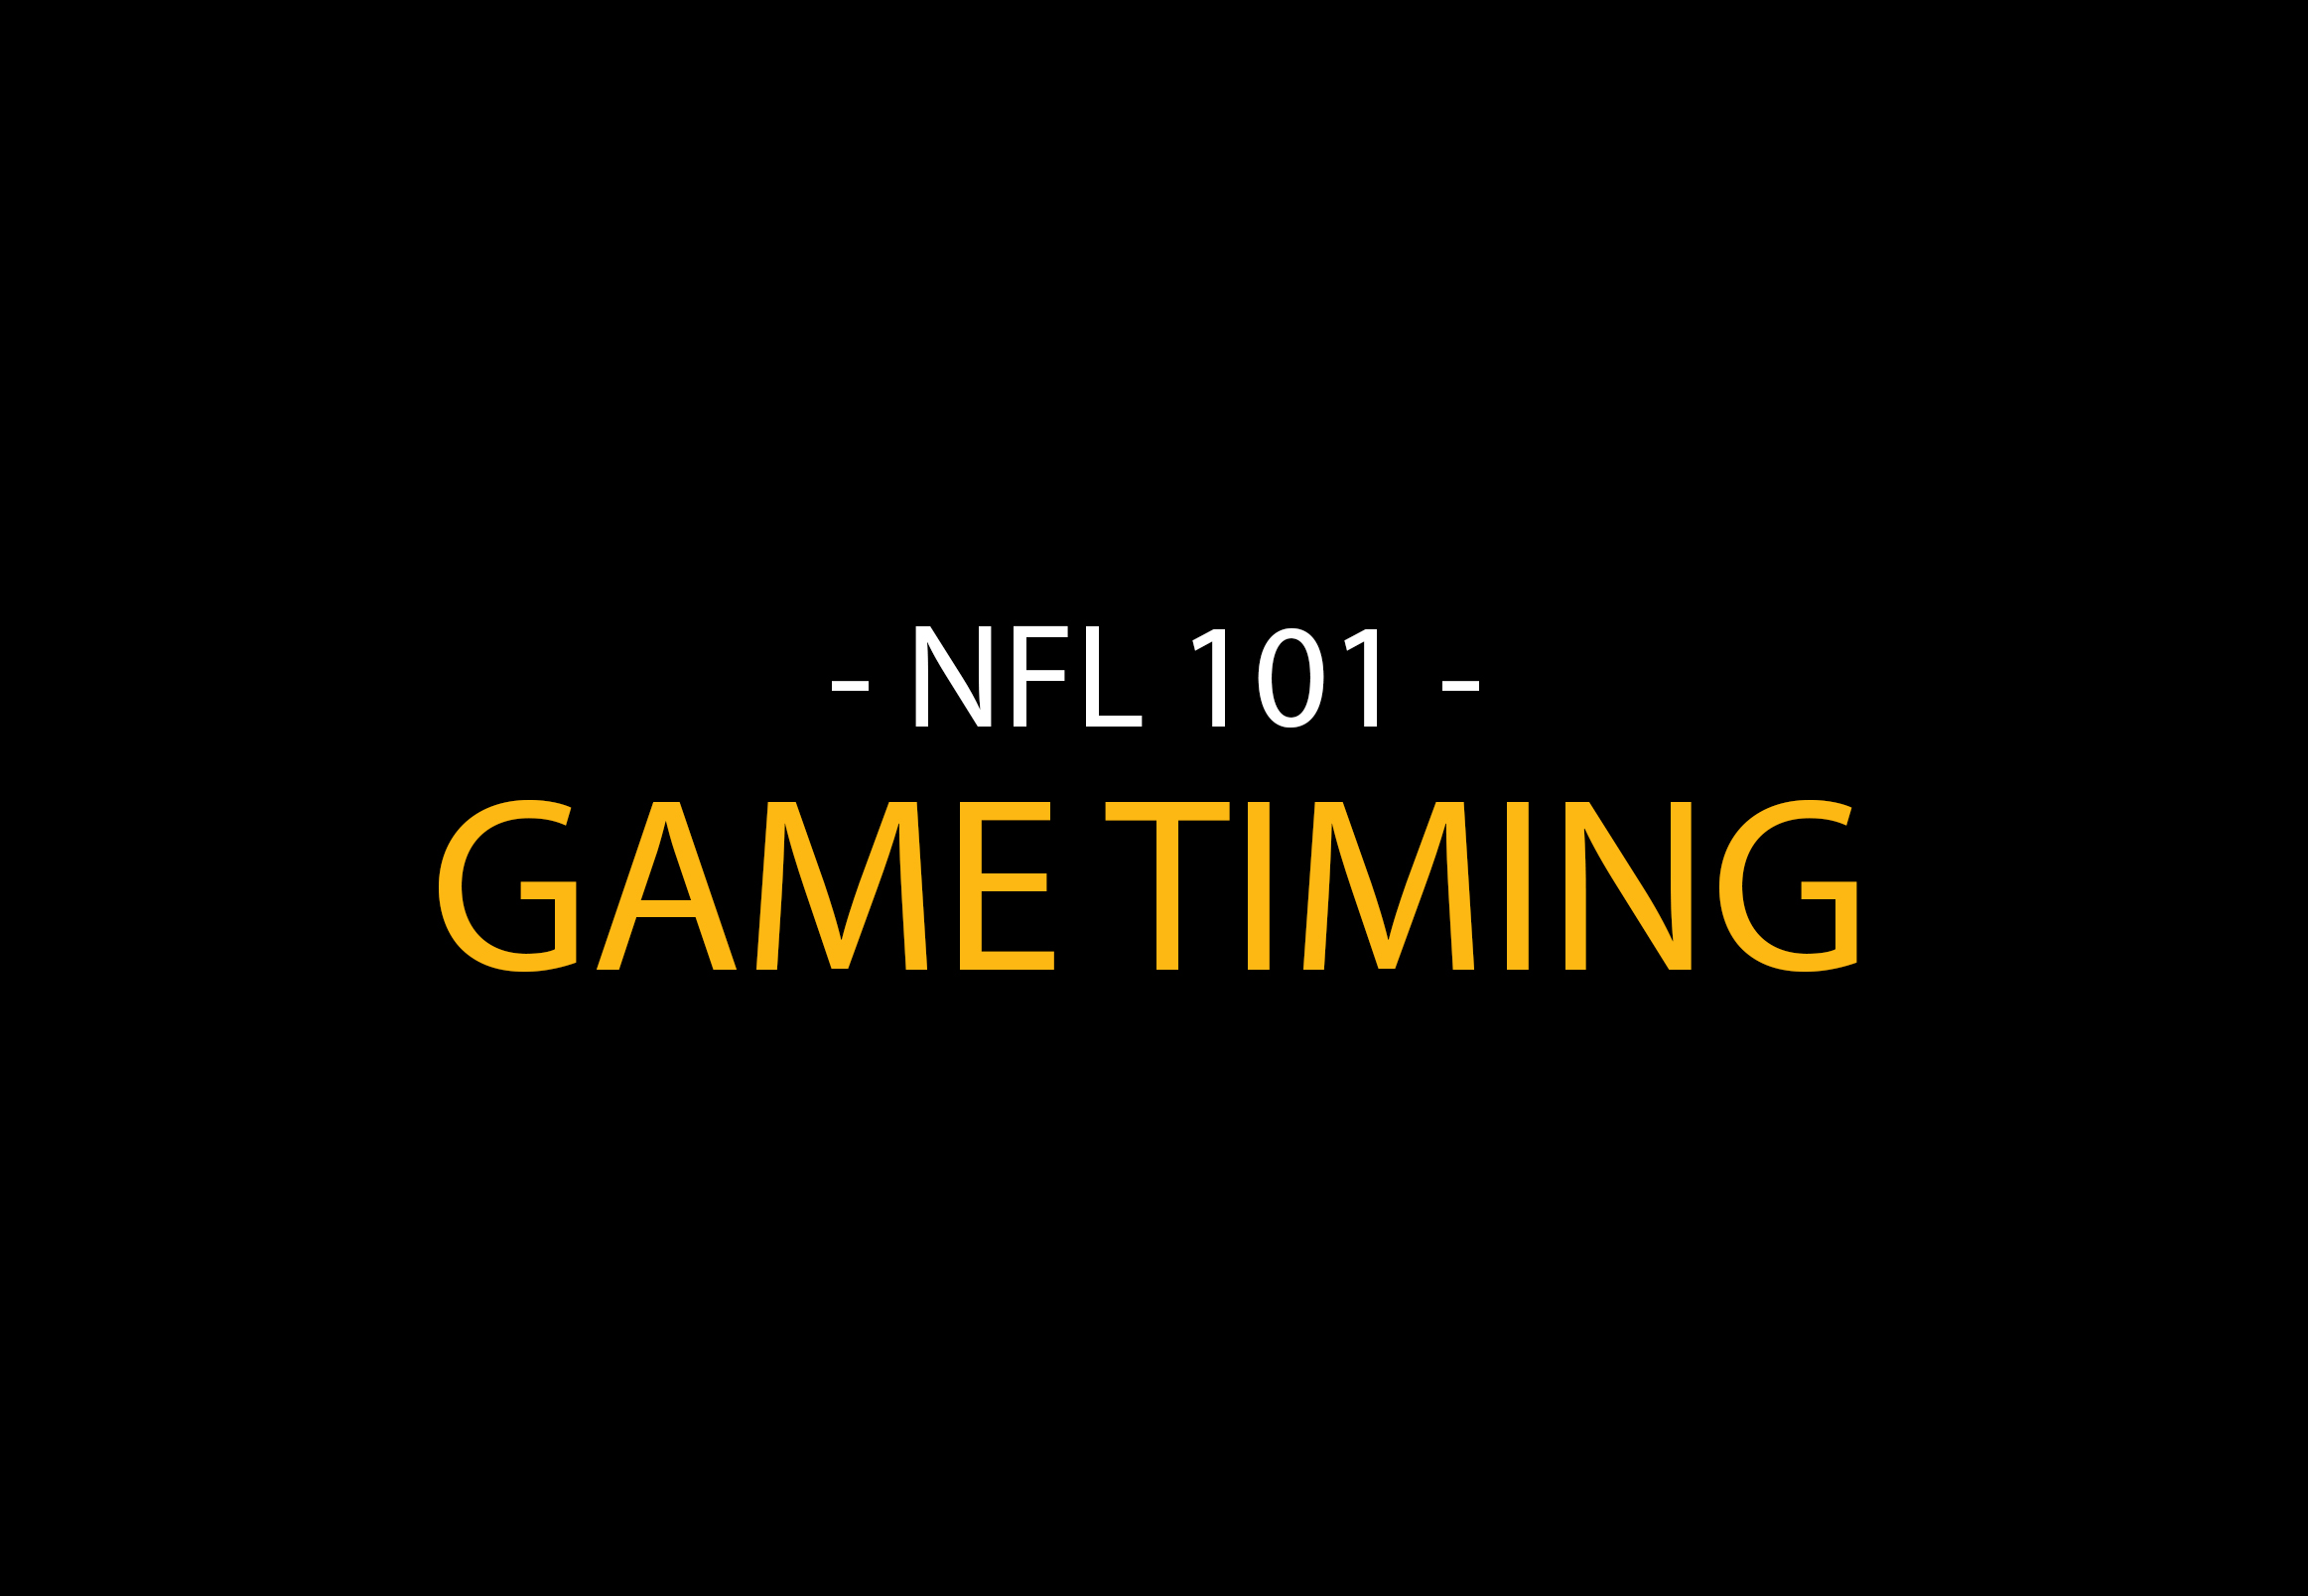 NFL Rules 101: A Beginner’s Guide to NFL Game Timing